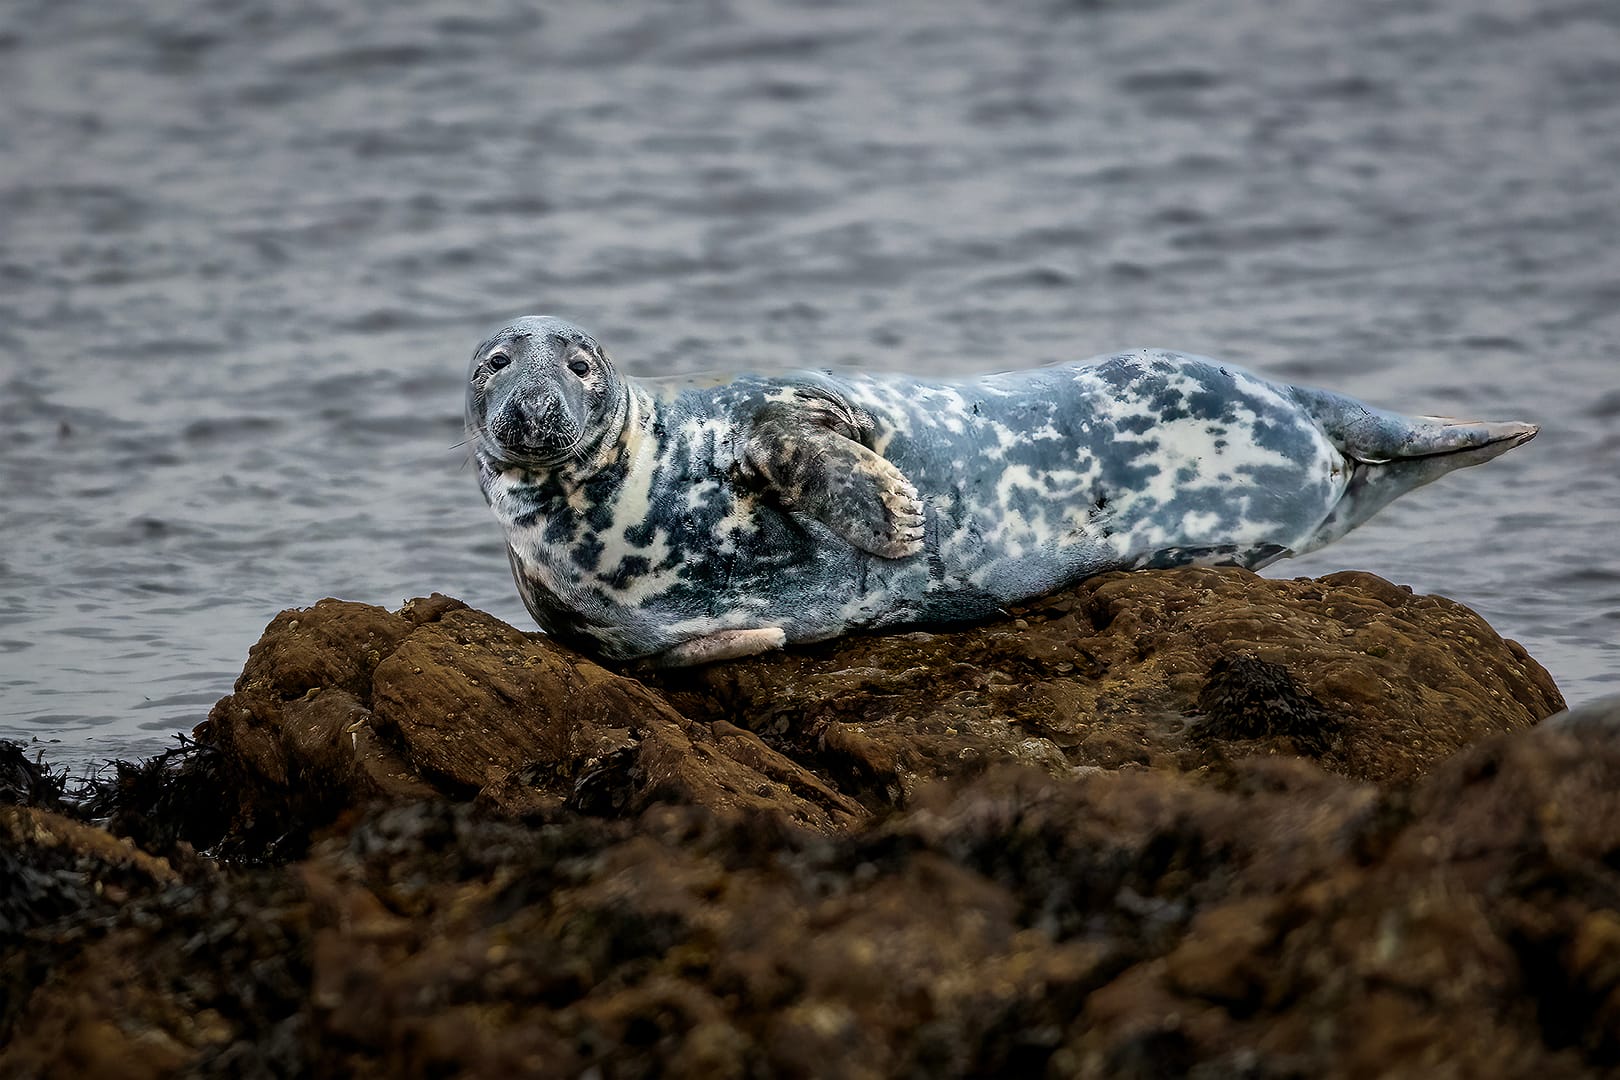 Seal Telephoto Photography on a Full-Frame DSLR